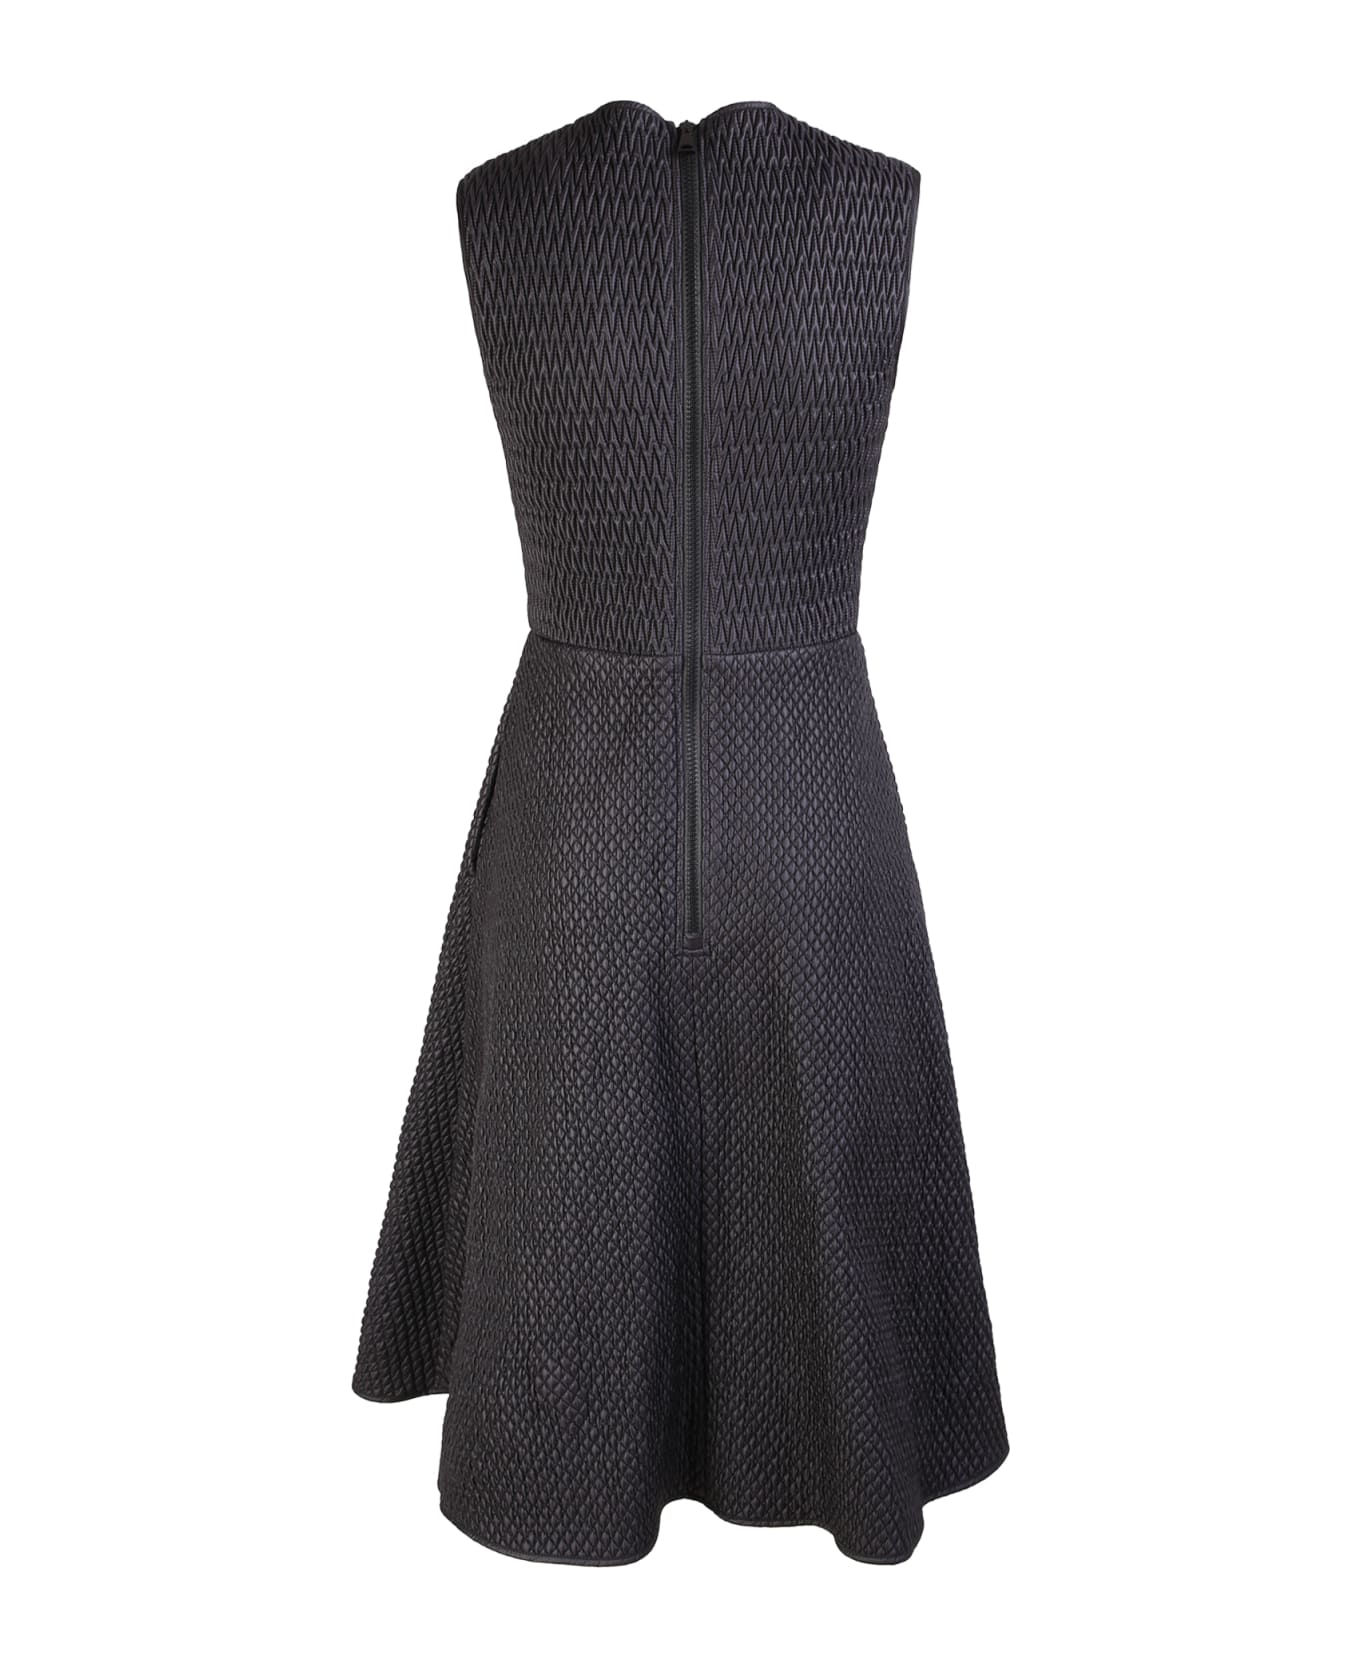 Moncler Quilted Design Dress And Flared Skirt - Multi